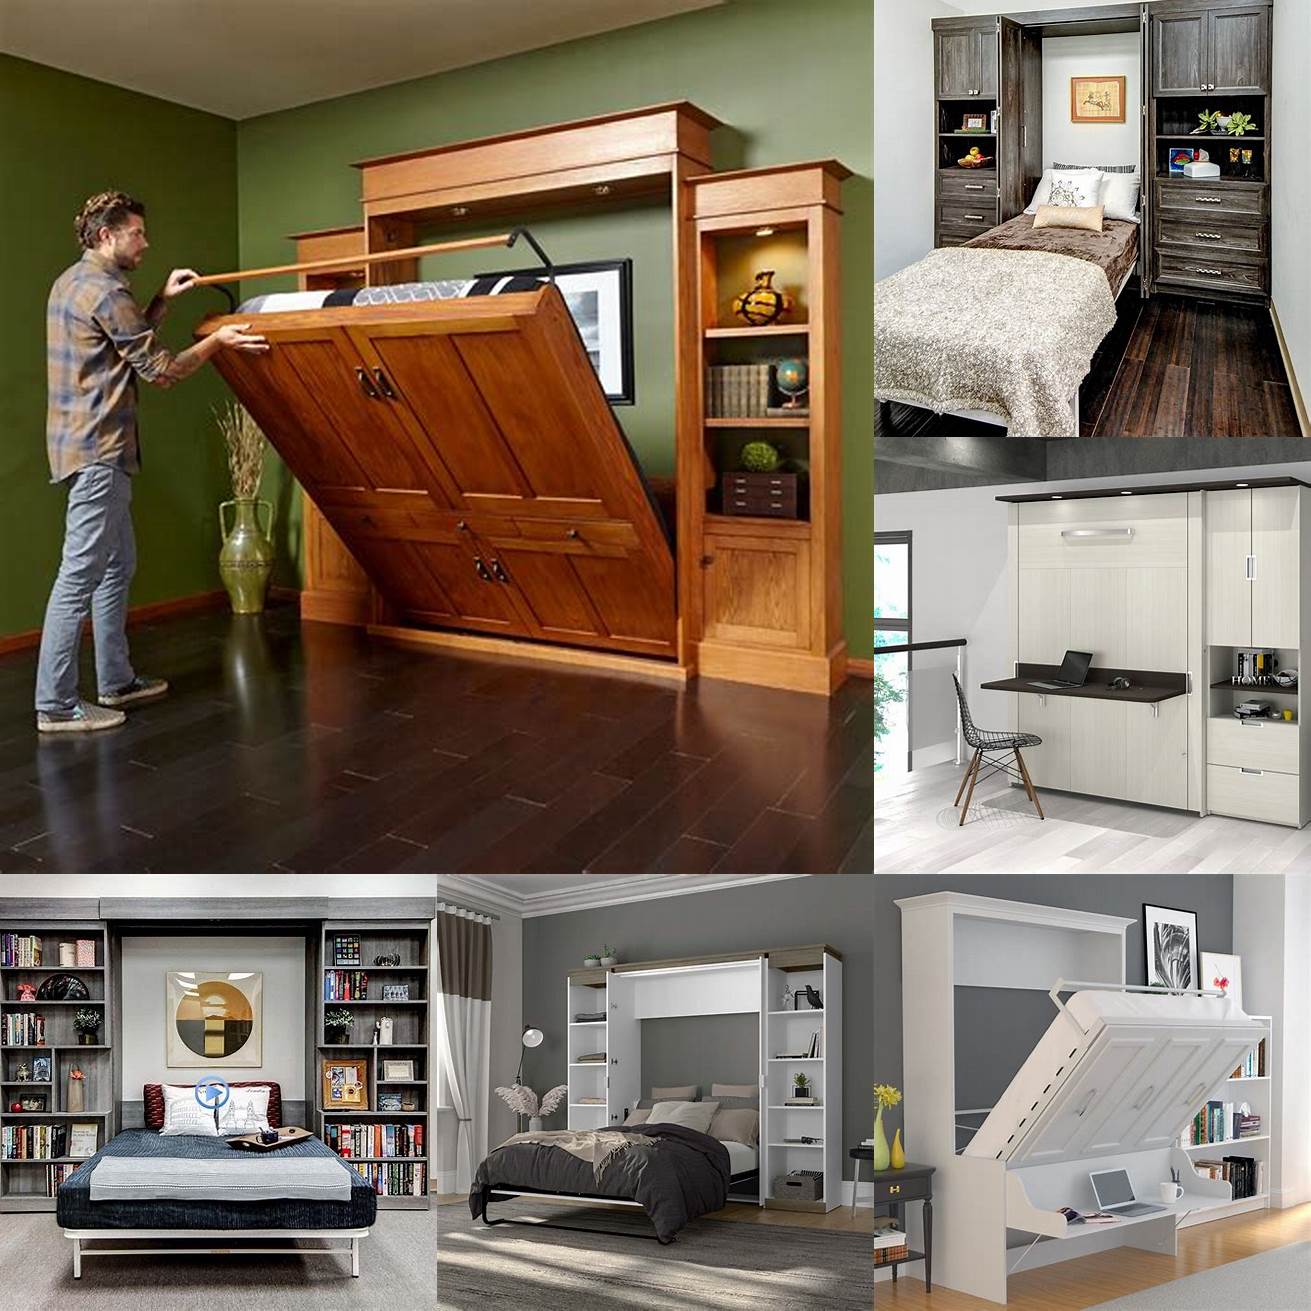 Murphy bed with built-in storage